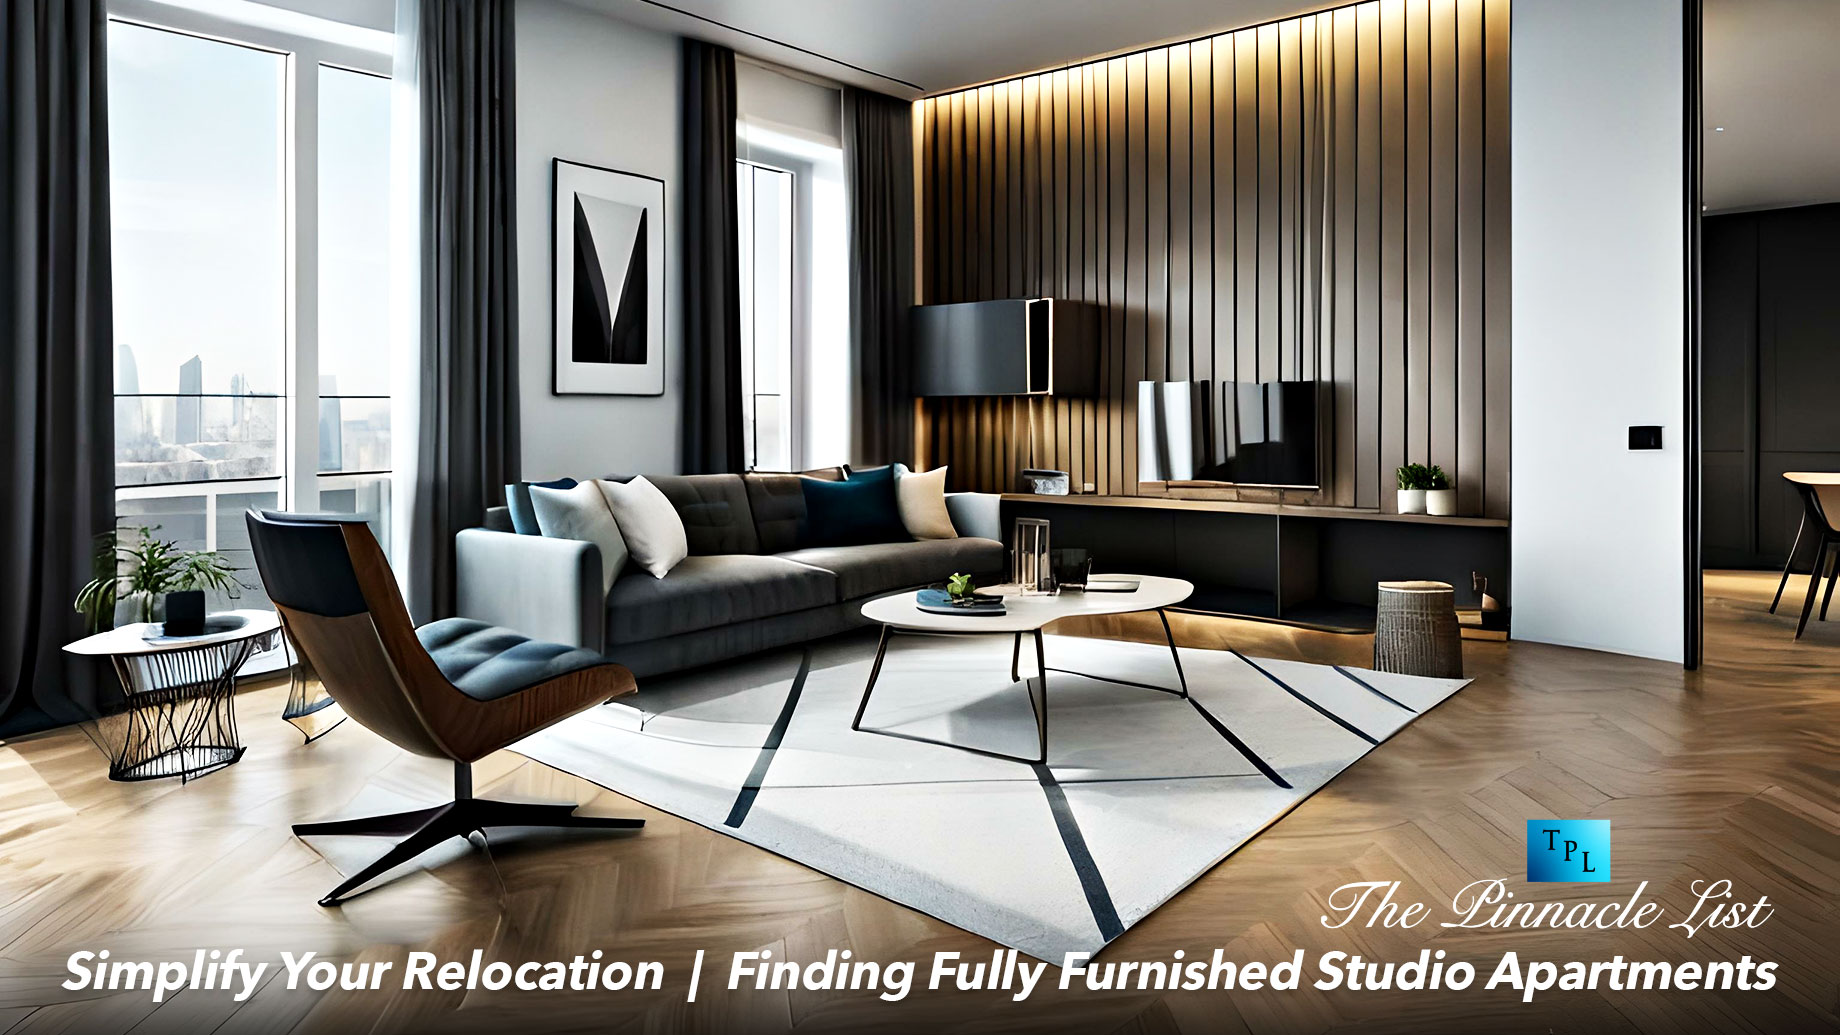 Simplify Your Relocation - Finding Fully Furnished Studio Apartments